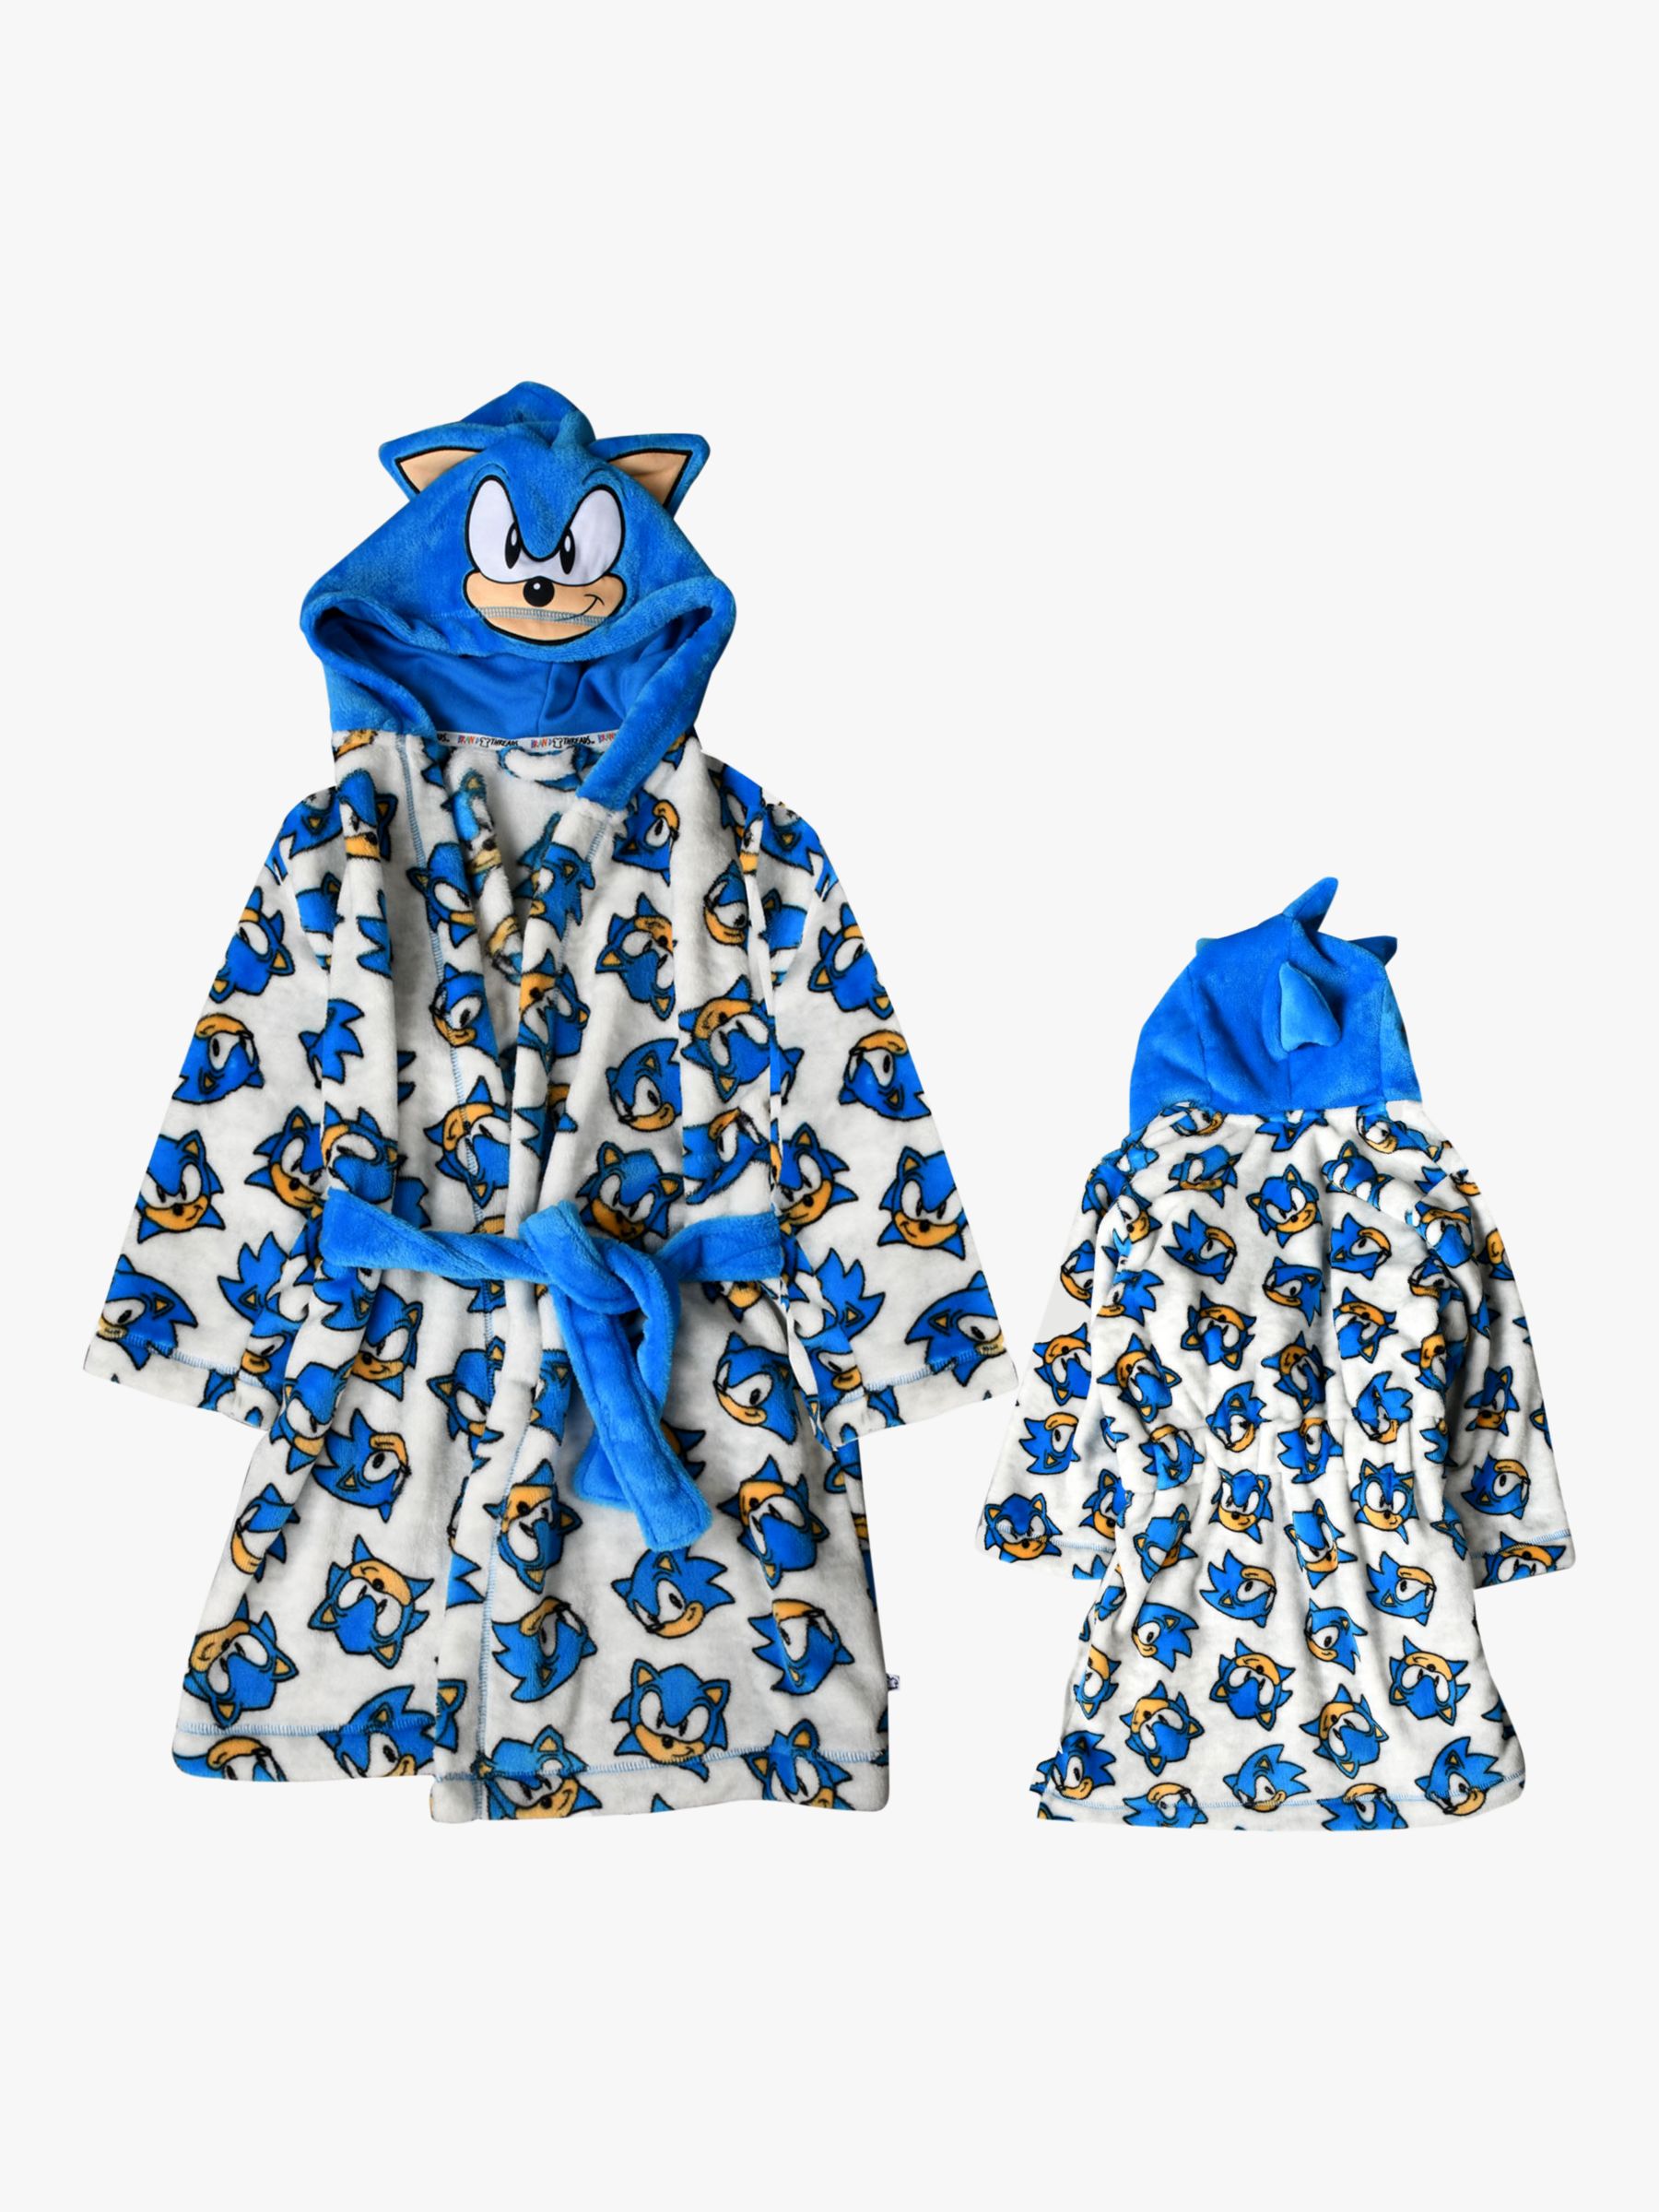 Buy Brand Threads Kids' Sonic The Hedgehog Dressing Gown, Blue/Grey Online at johnlewis.com